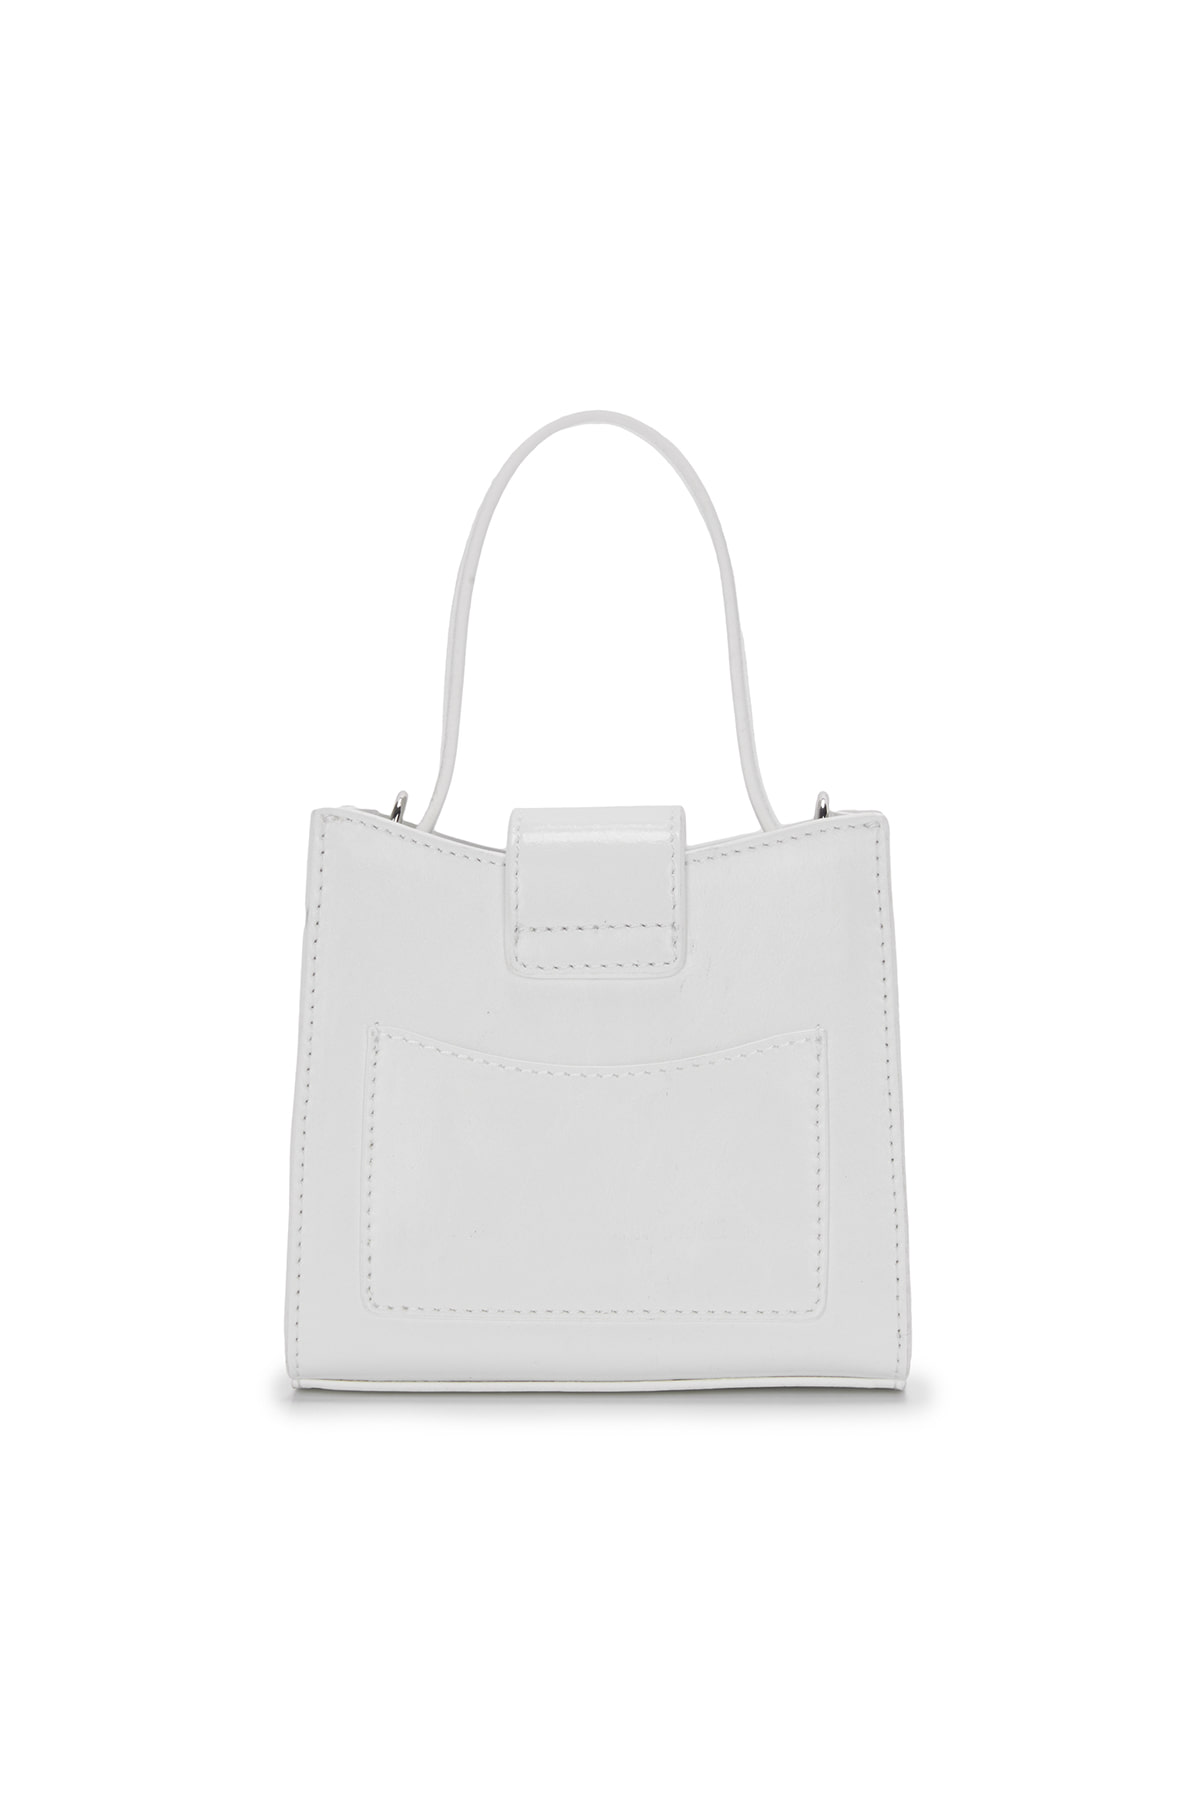 SQUARE MINI LEATHER BUCKLE BAG IN IVORY